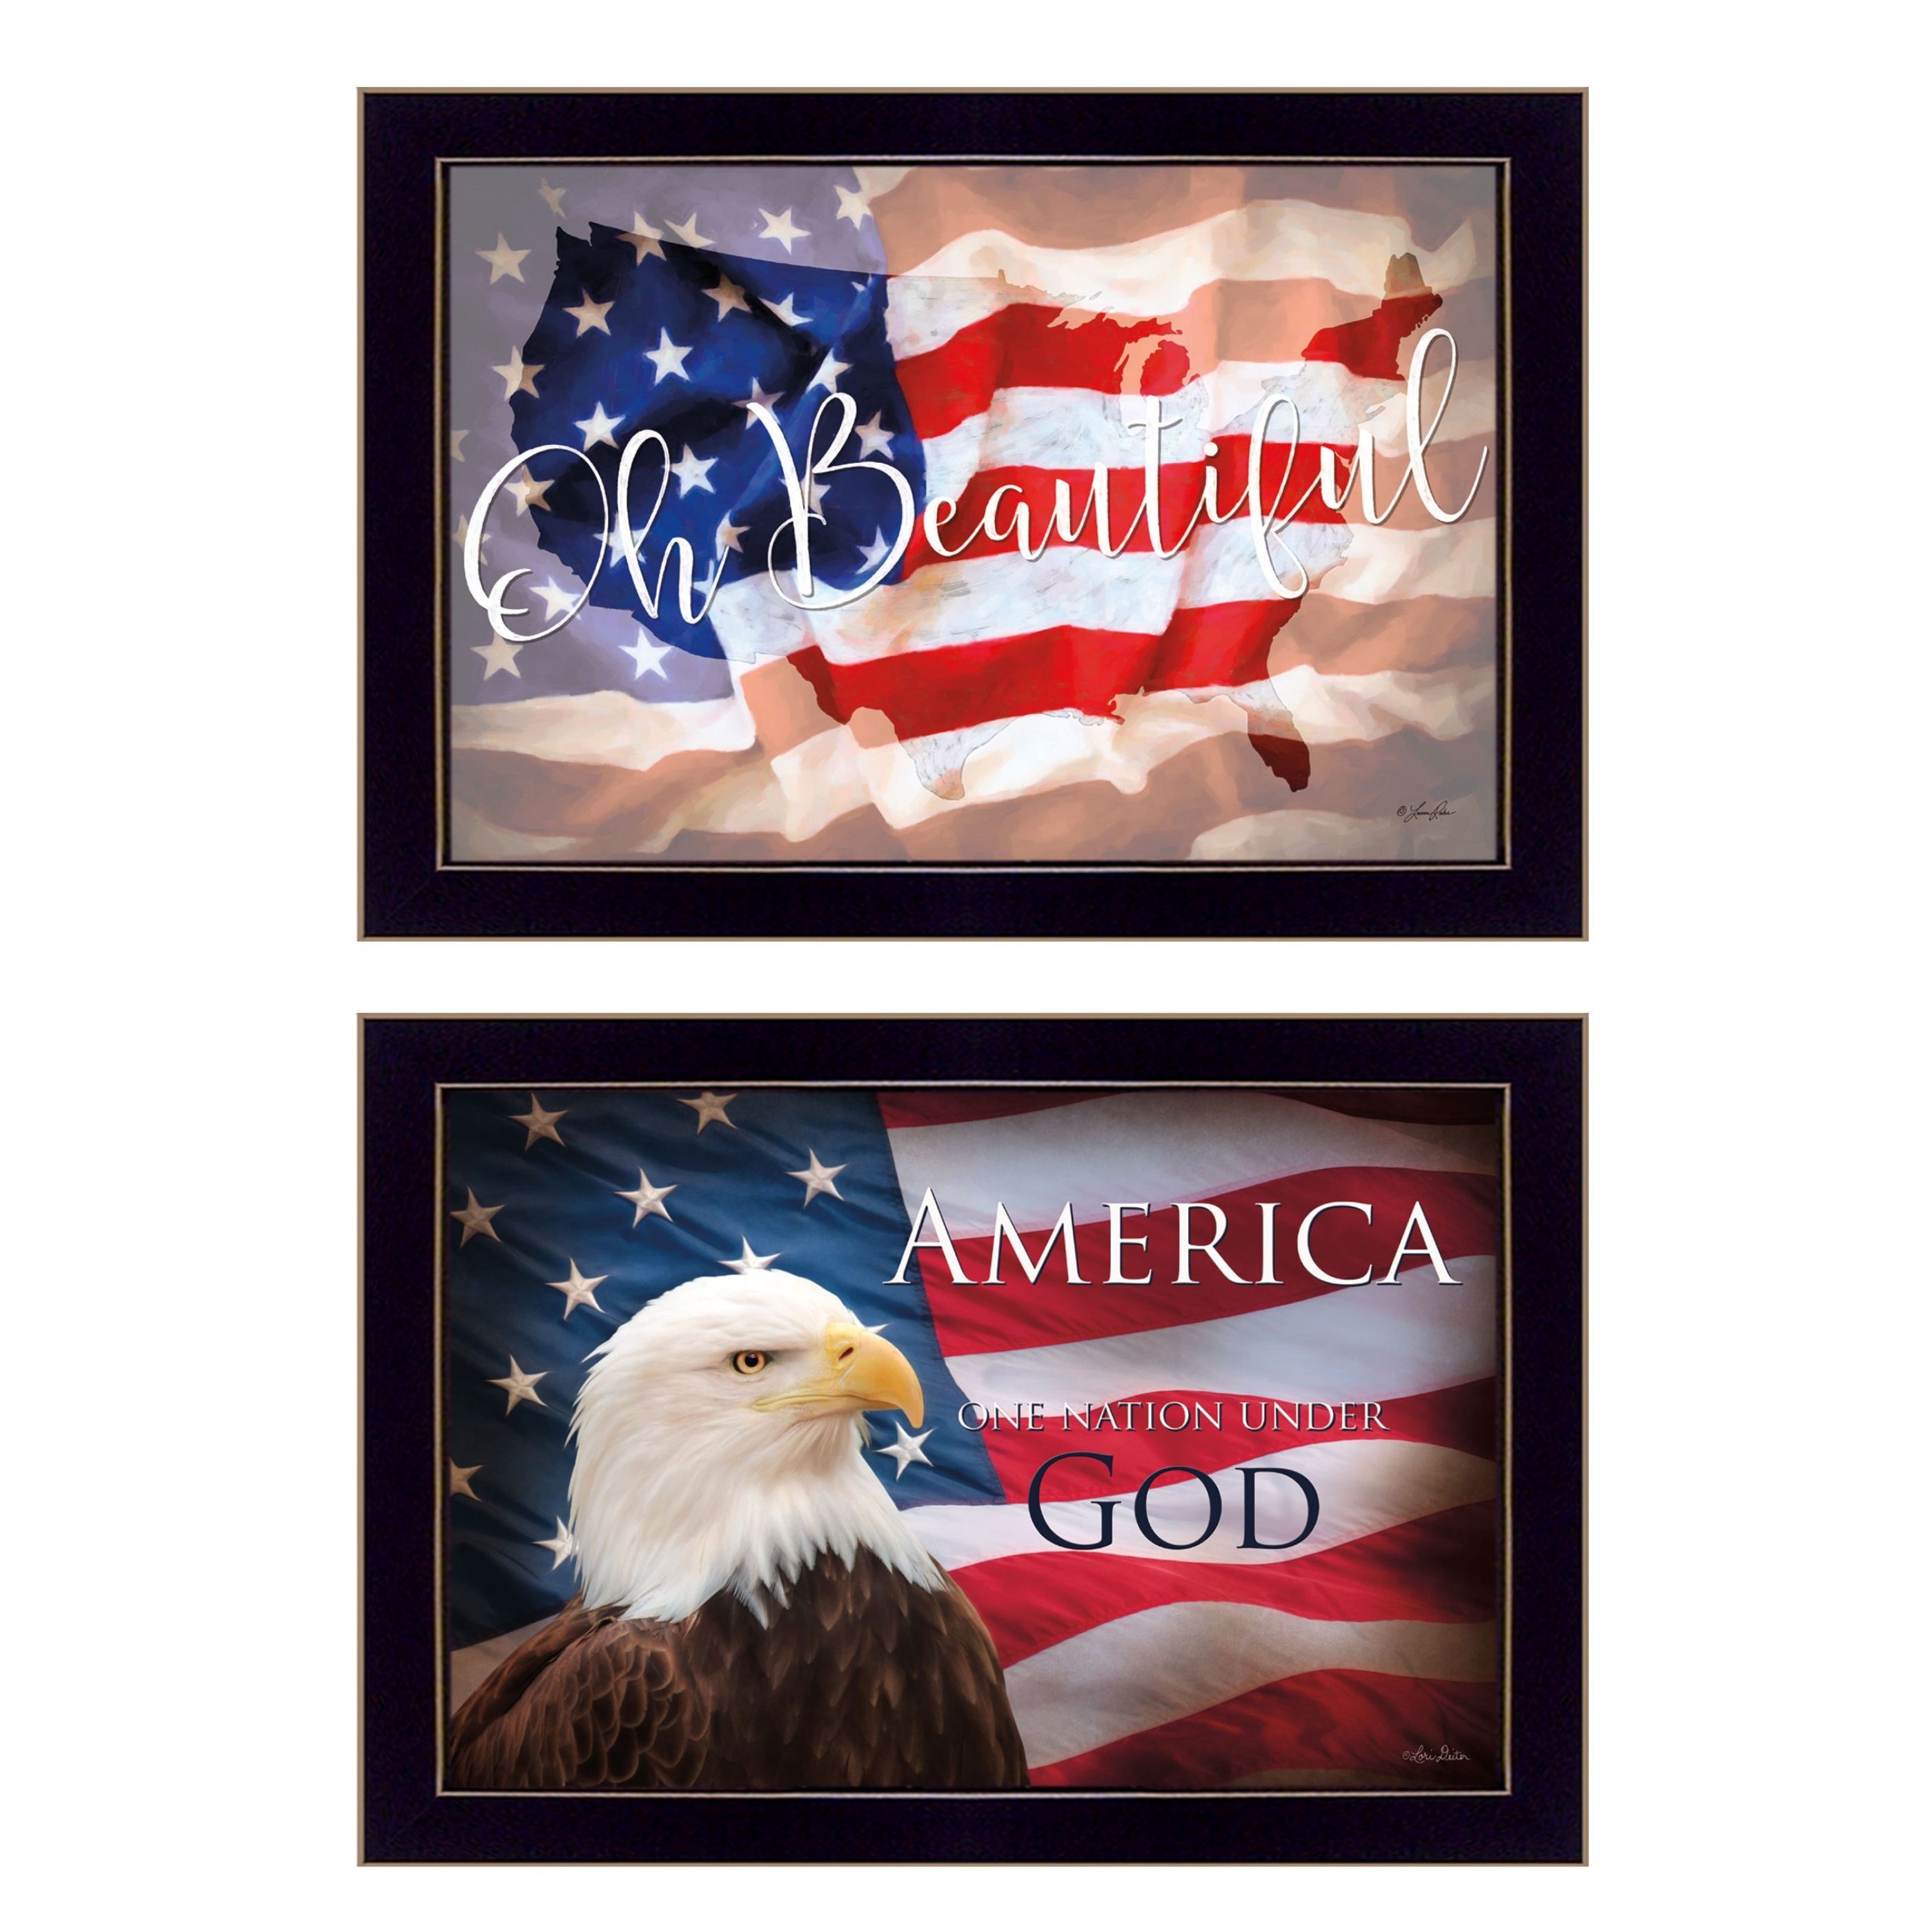 "Oh Beautiful America Collection" 2-Piece Vignette By L. Rader and L. Deiter, Printed Wall Art, Ready To Hang Framed Poster, Black Frame